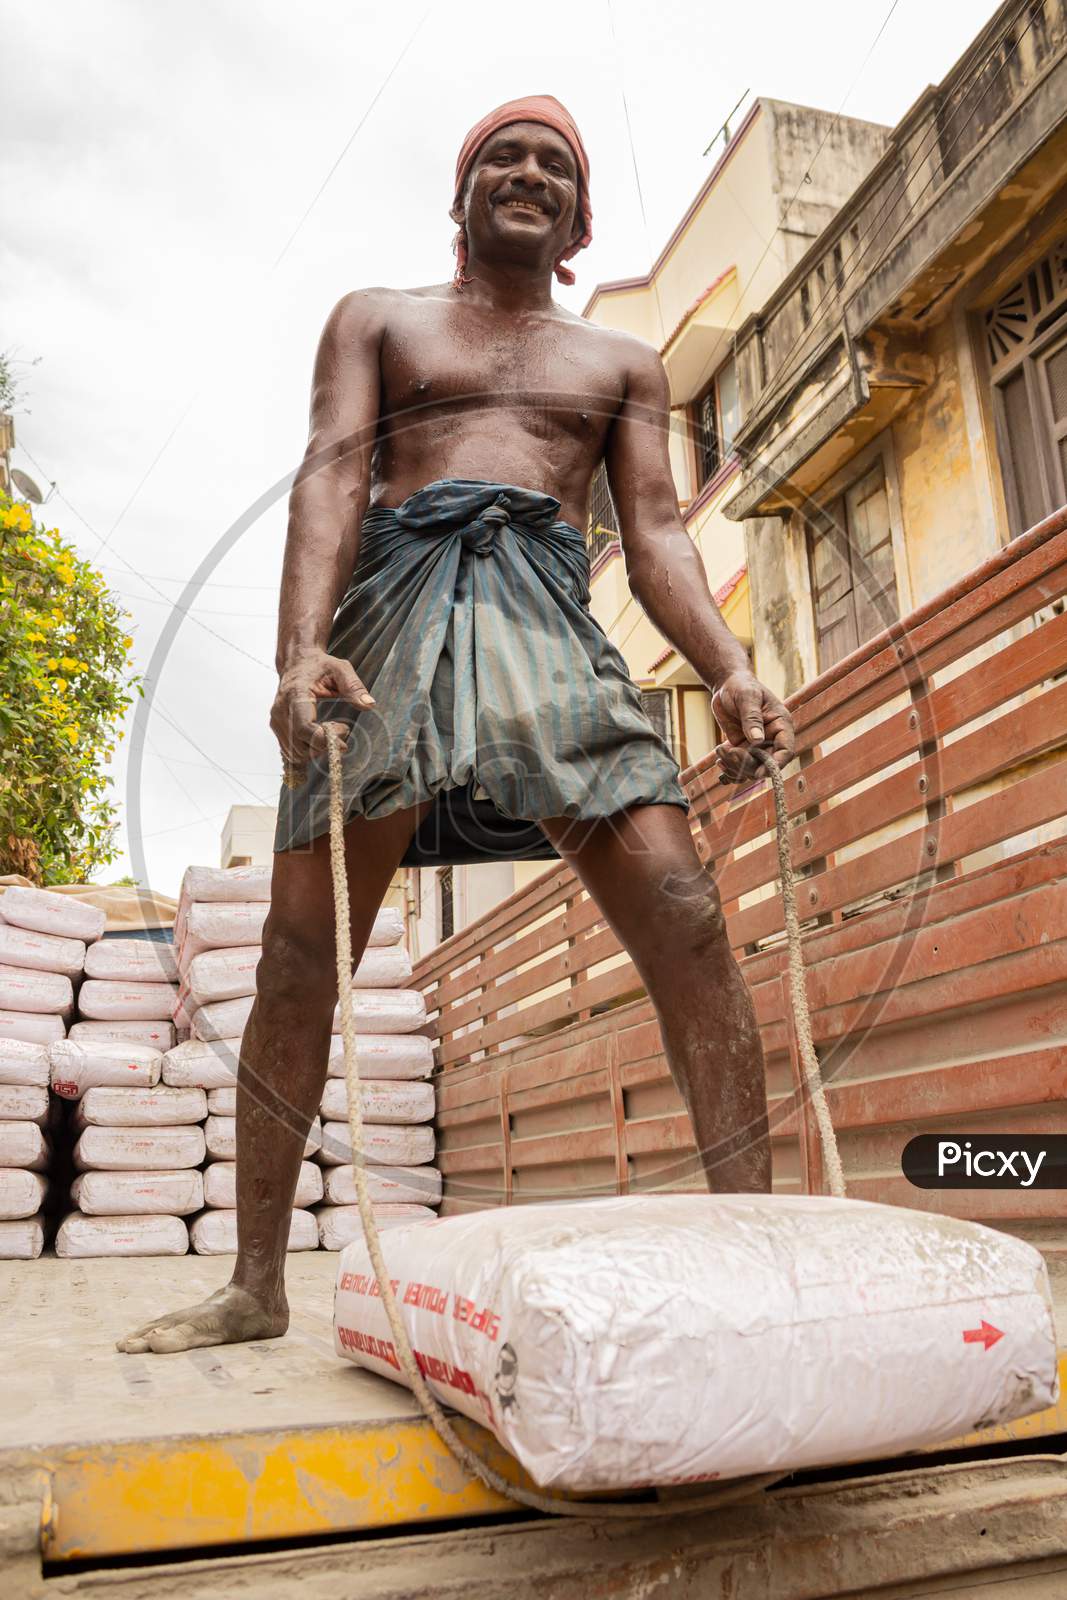 Indian Construction Worker Looking At Camera And Smiling Before Lifting A Sack Of Cement